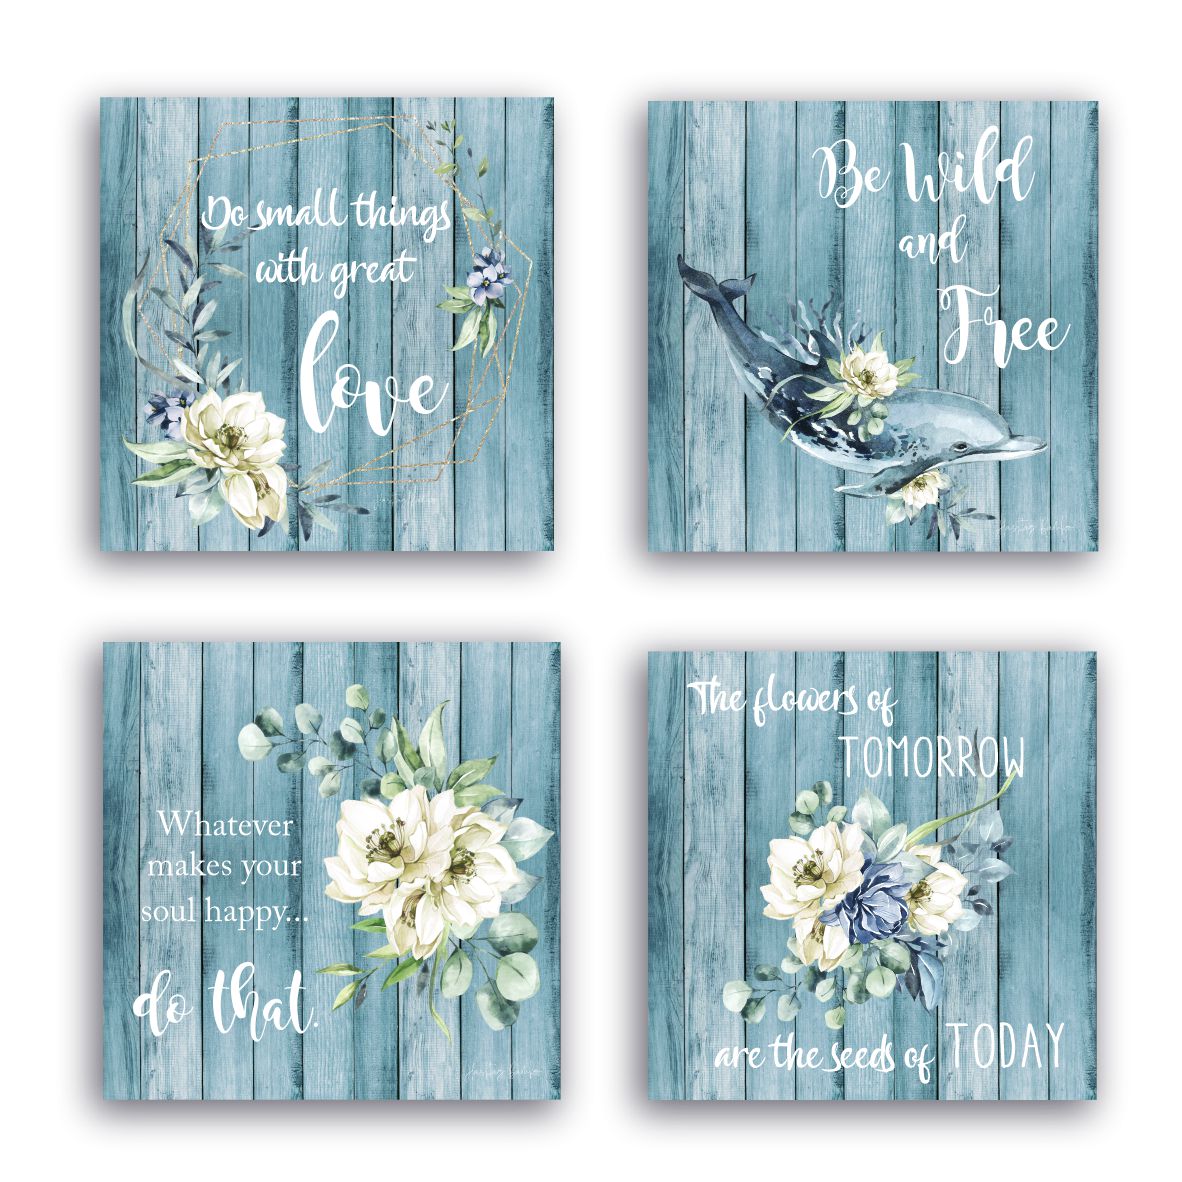 Wall art wooden print, duck-egg blue floral, farmhouse, rustic, shabby chic wooden panel with watercolour design.